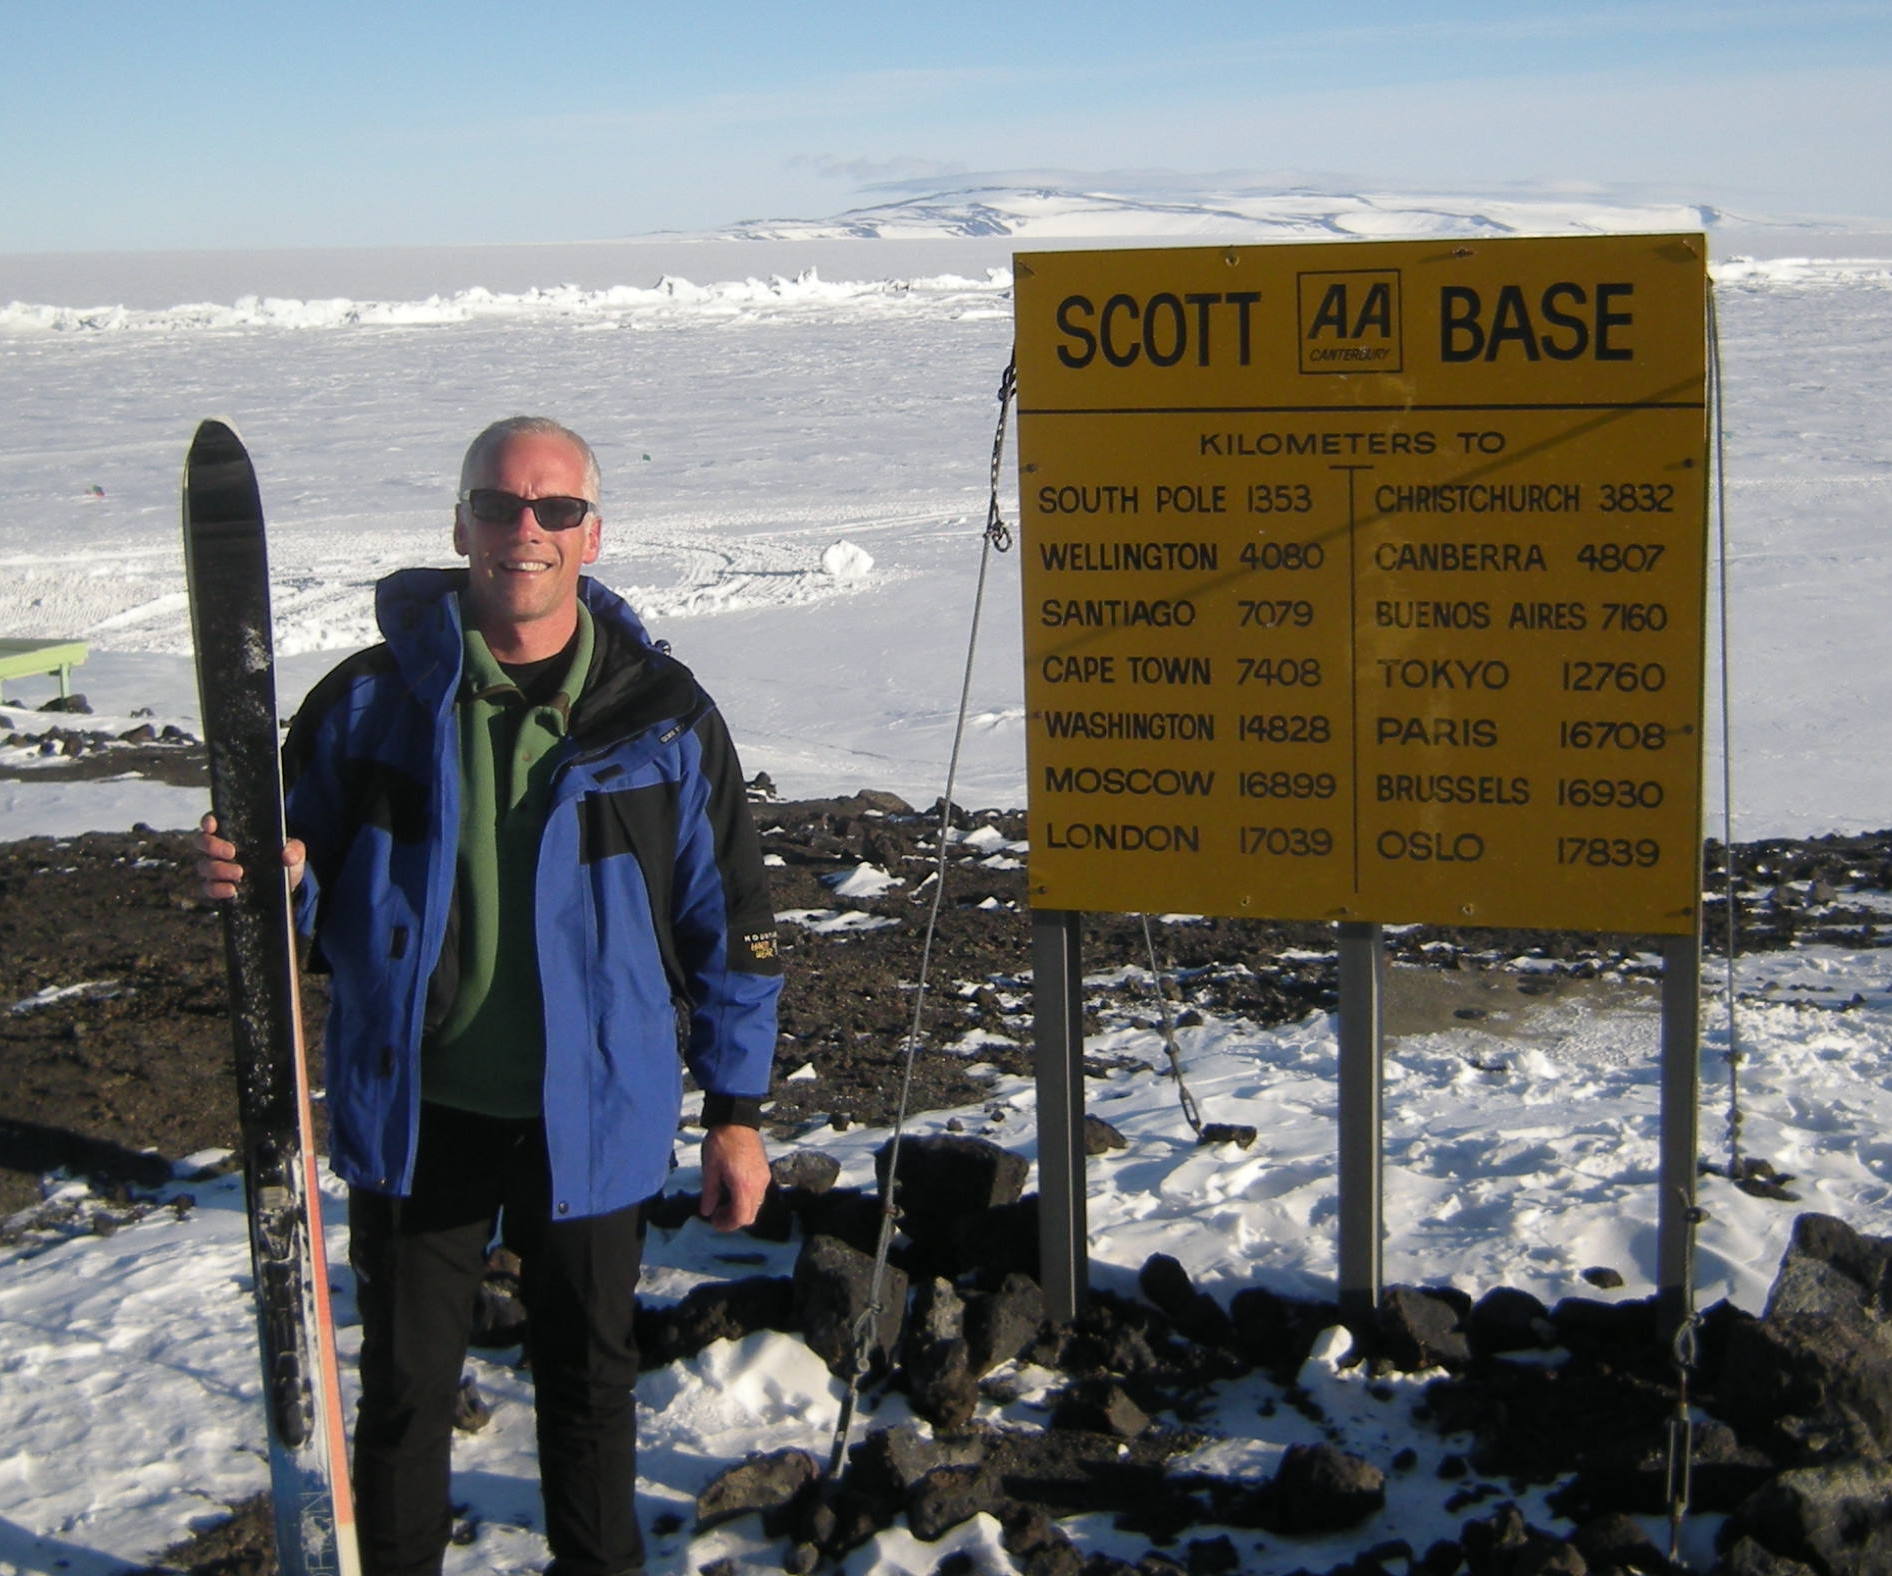 The author with his skis at New Zealand's Scott Base